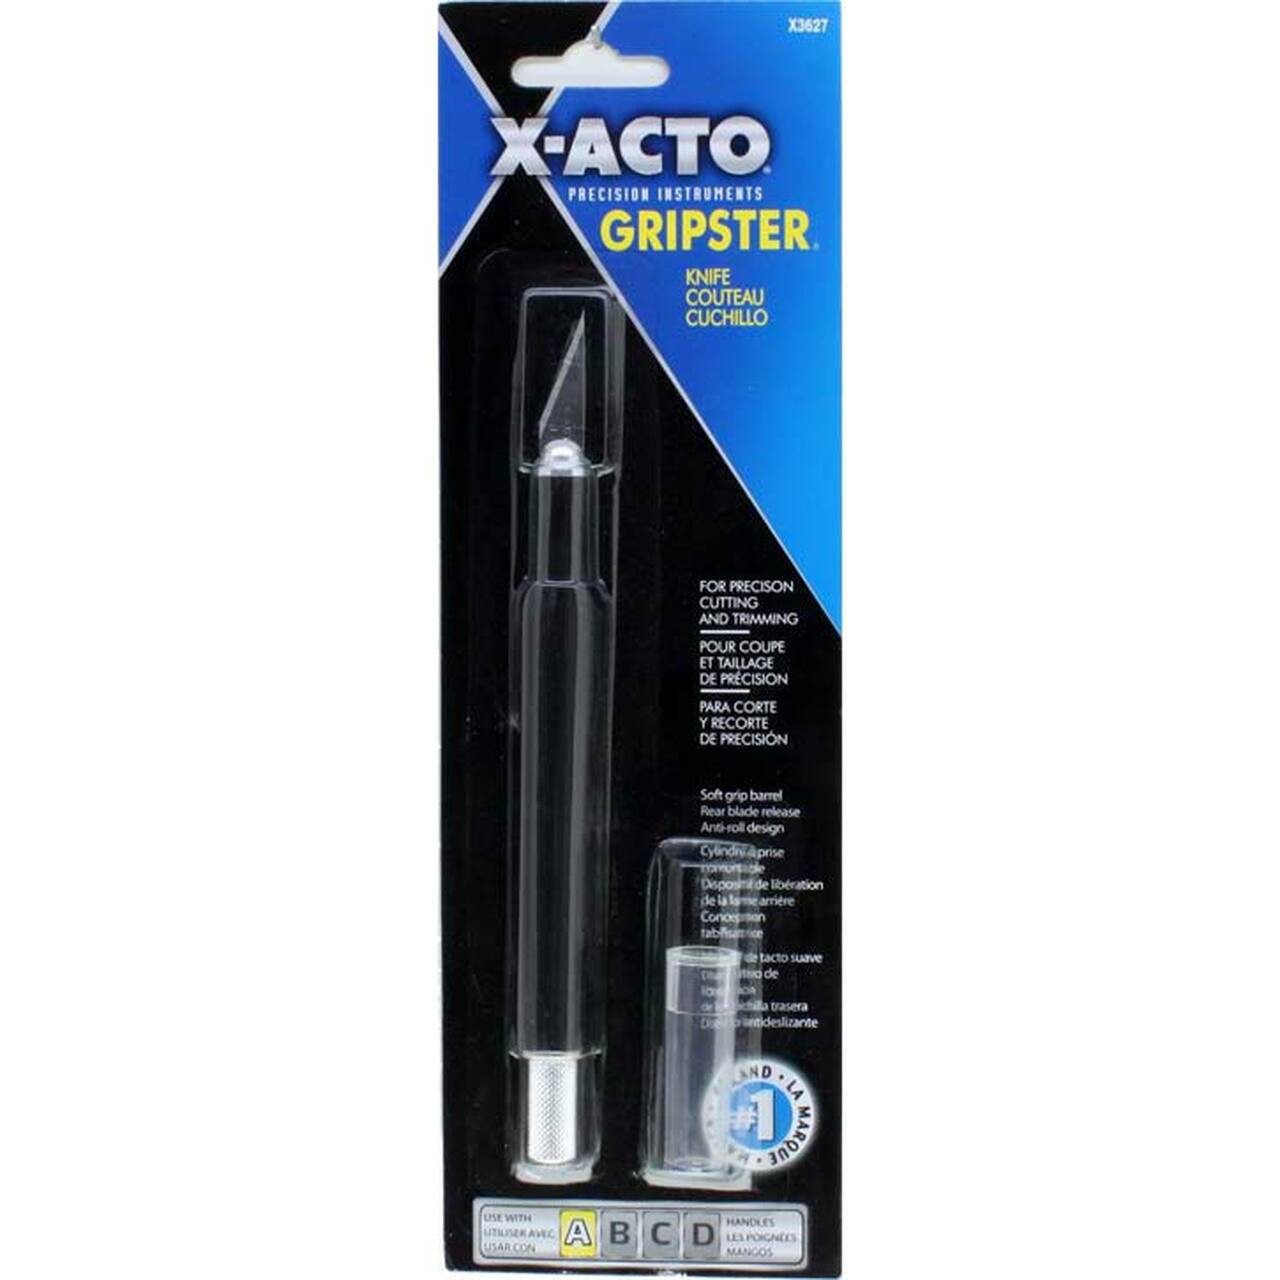 X-Acto Knife #2 with Safety Cap Z-Series